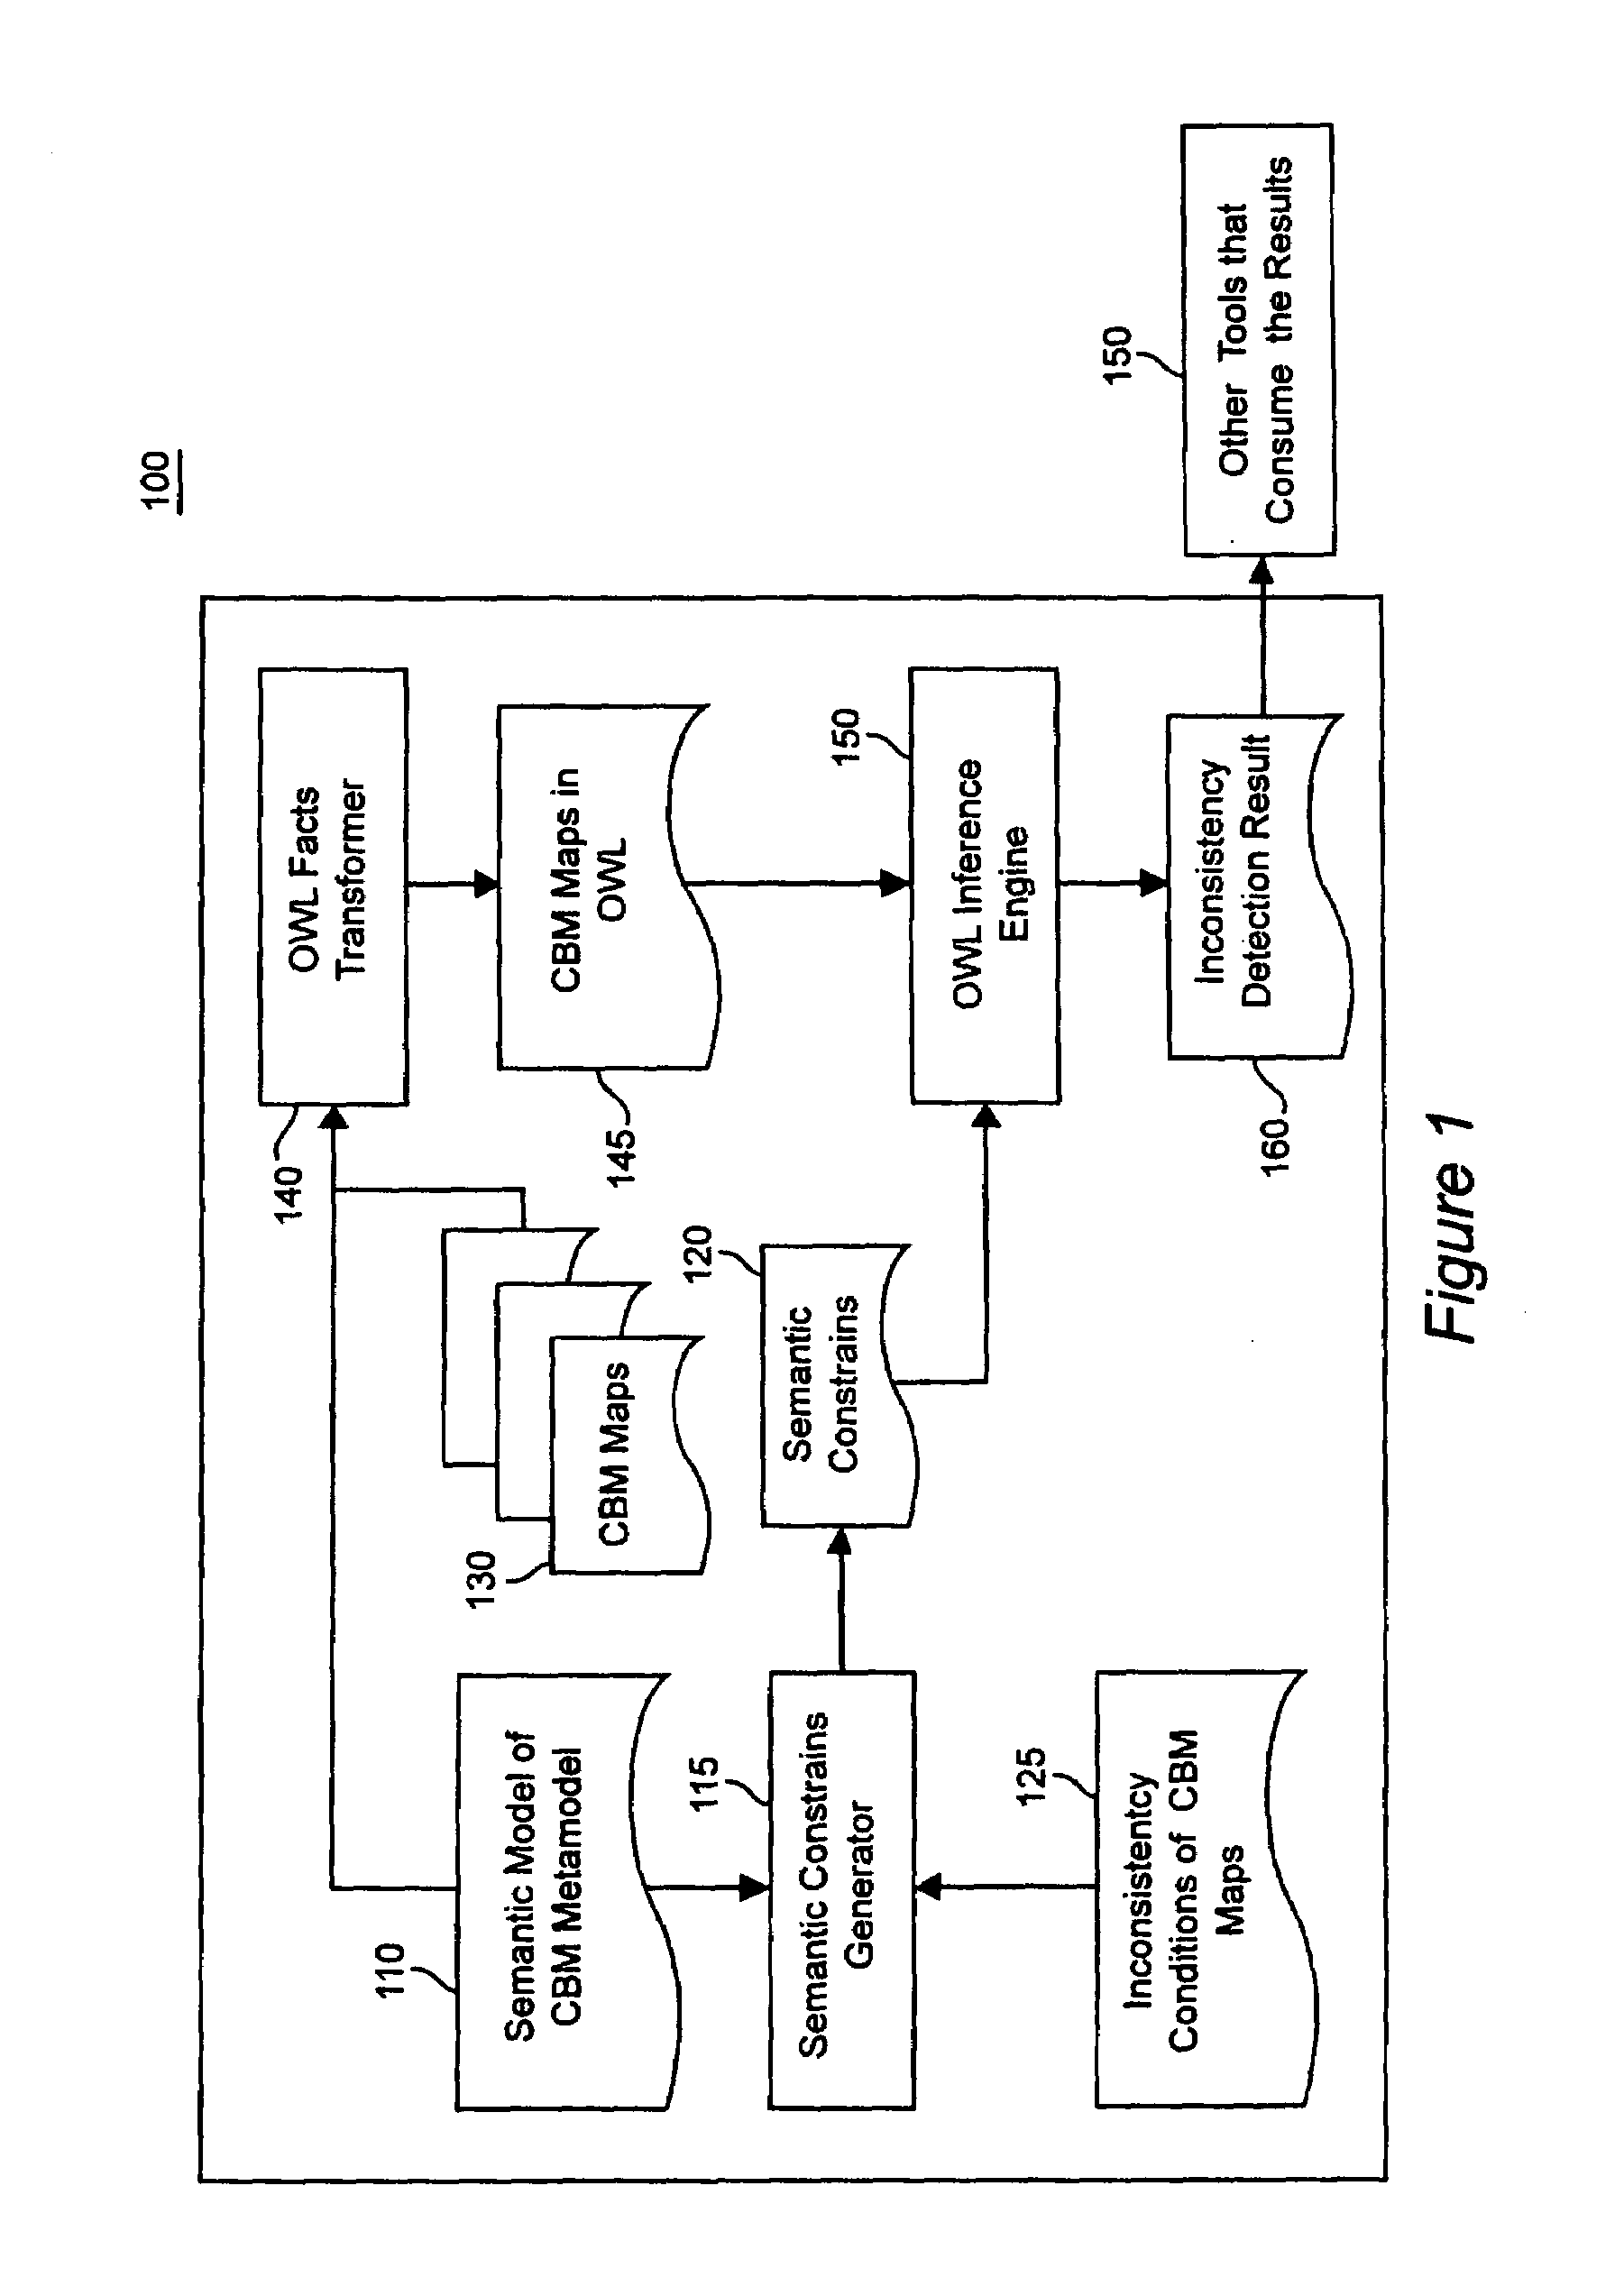 System and method to validate consistency of component business model maps